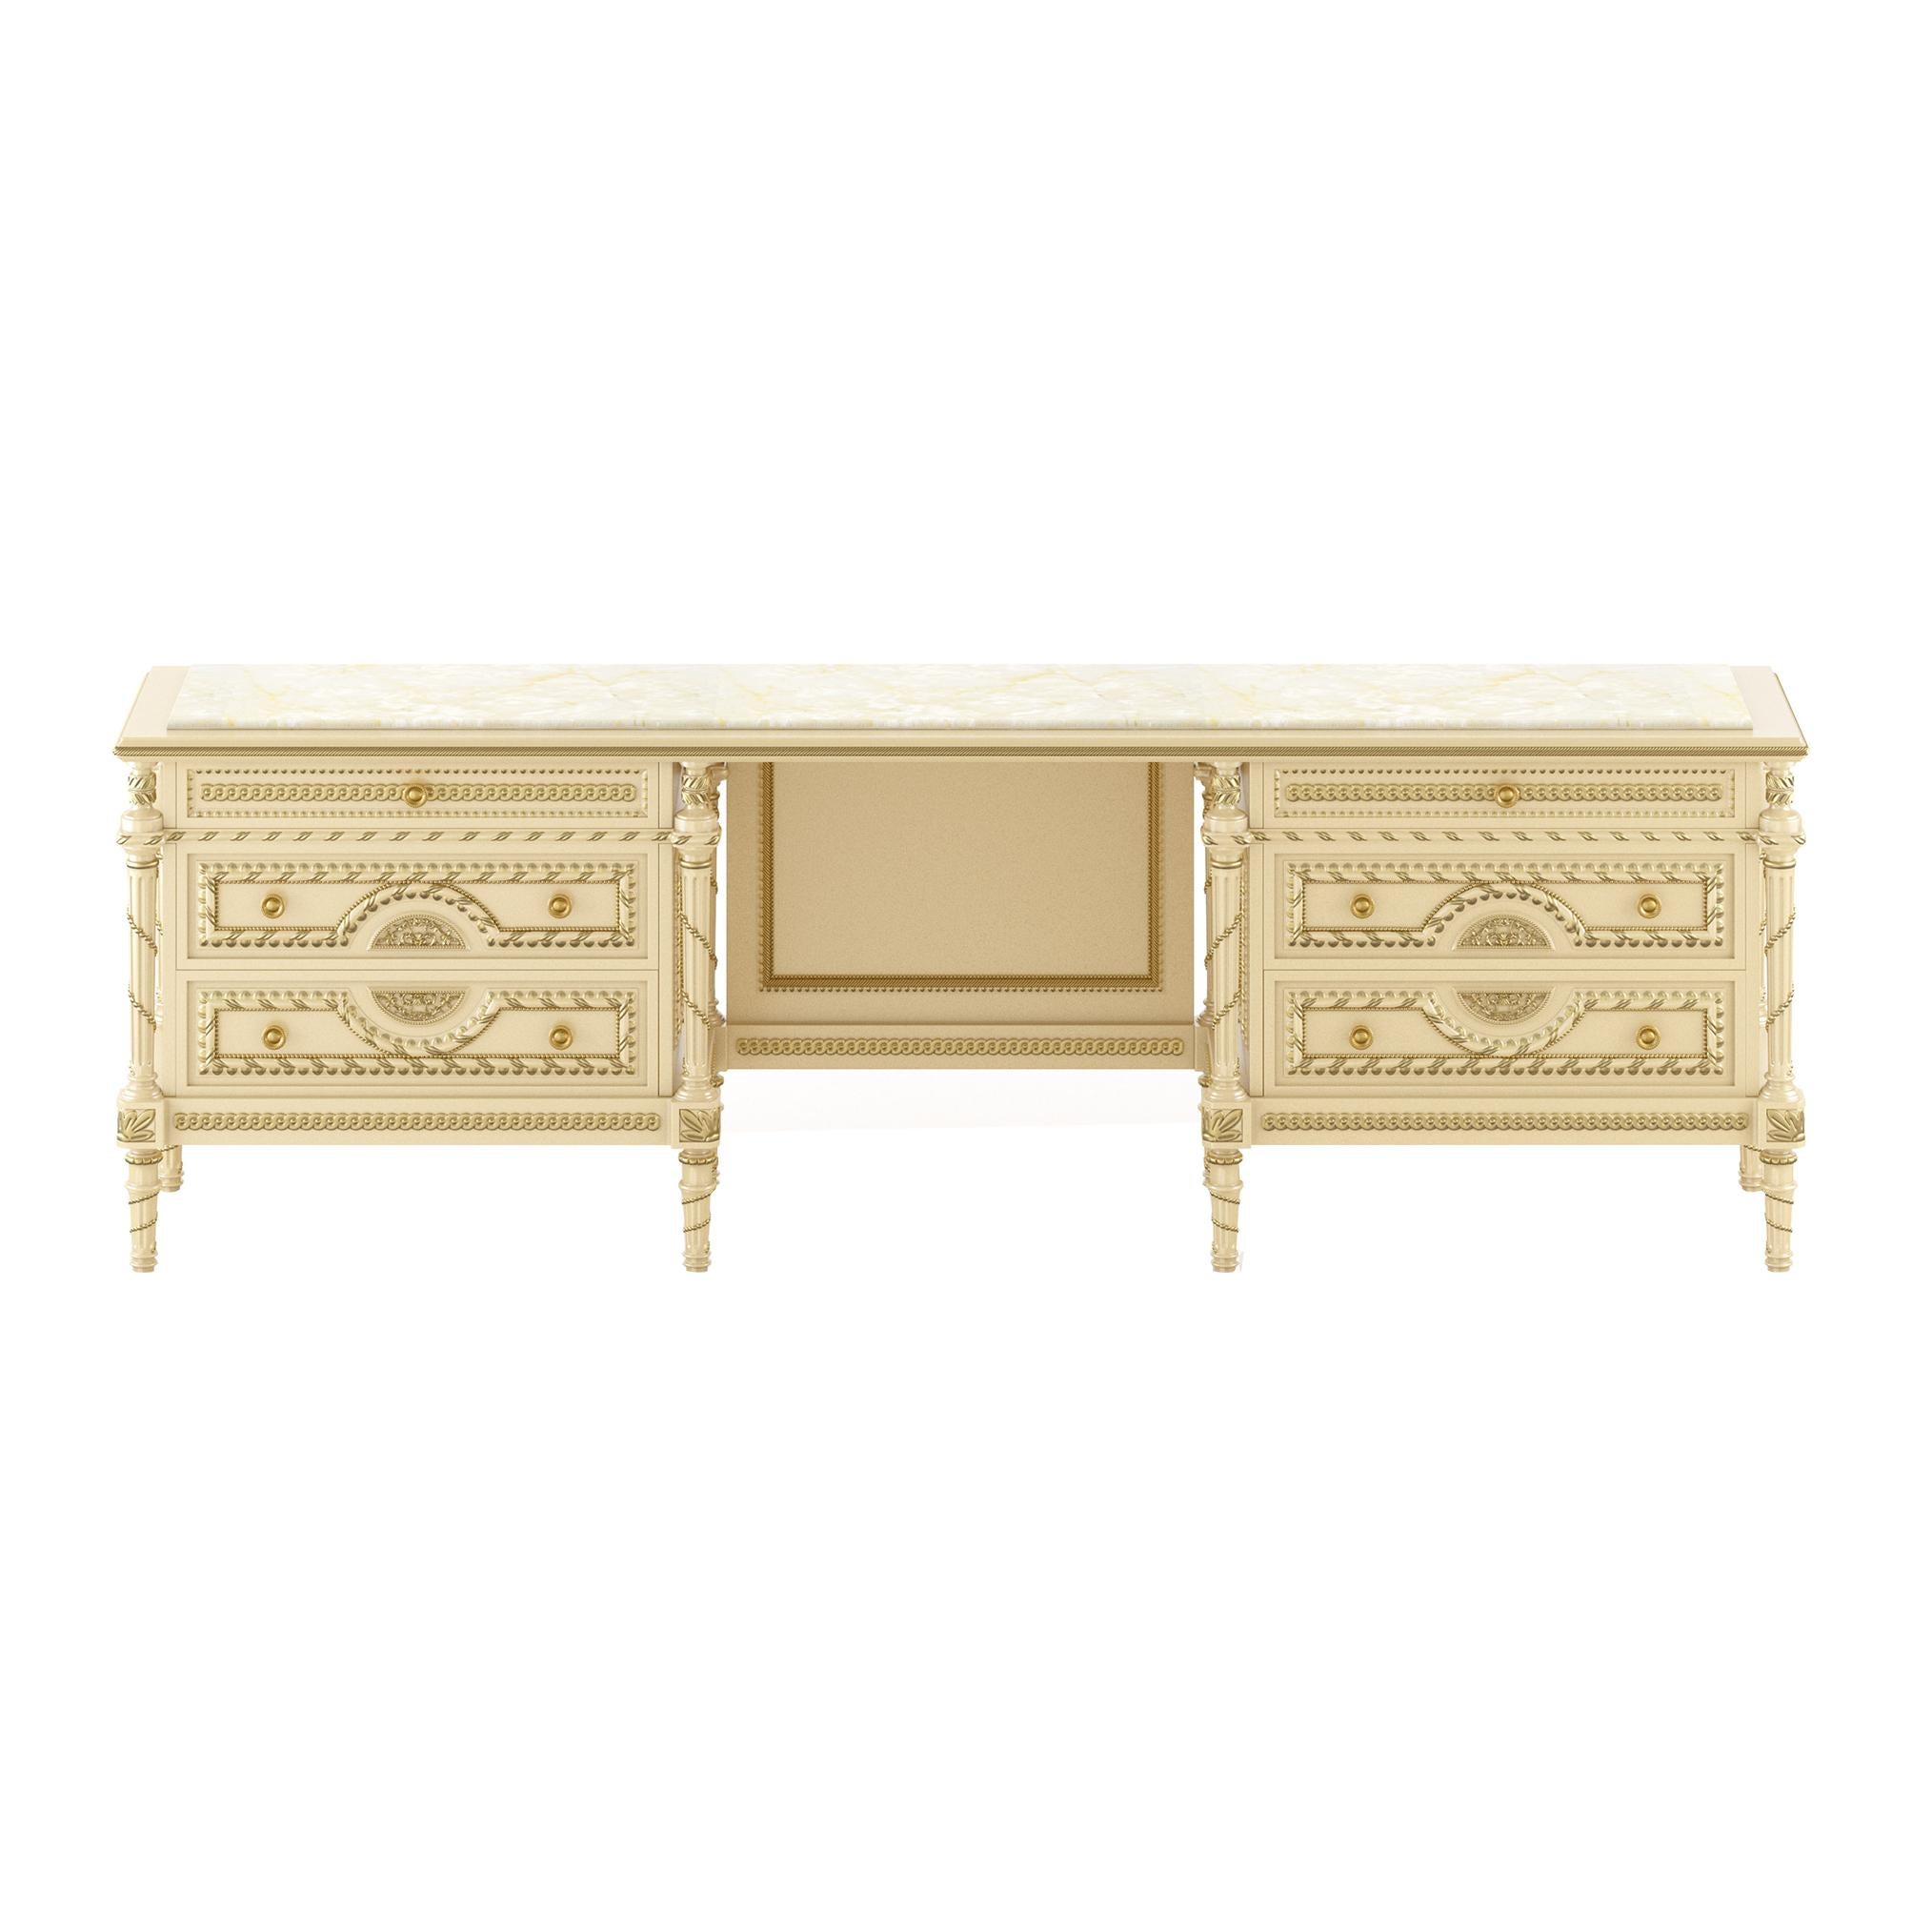 Luxurious empire-style vanity unit from Modenese Luxury Interiors, Italian furniture producer. Made of solid wood with white laquered finish, plus empire-style wood carved columns, silver leaf details and golden knobs, the great advantage of this